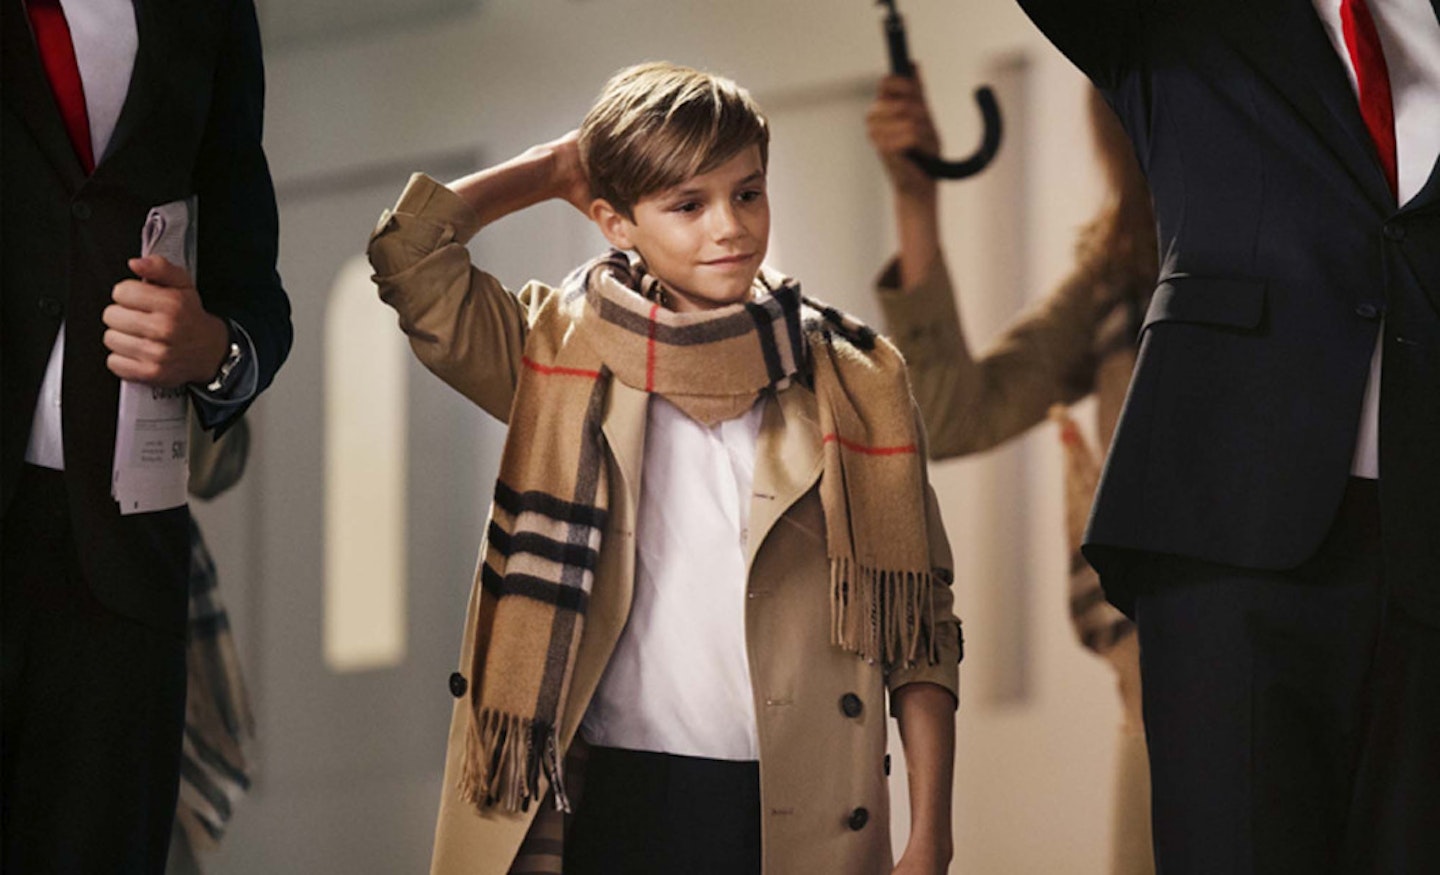 39._Burberry_Festive_Campaign_Stills__PRIVATE_AND_CONFIDENTIAL_-_ON_EMBARGO_9PM_UK_TIME_3_NOVEMBER_